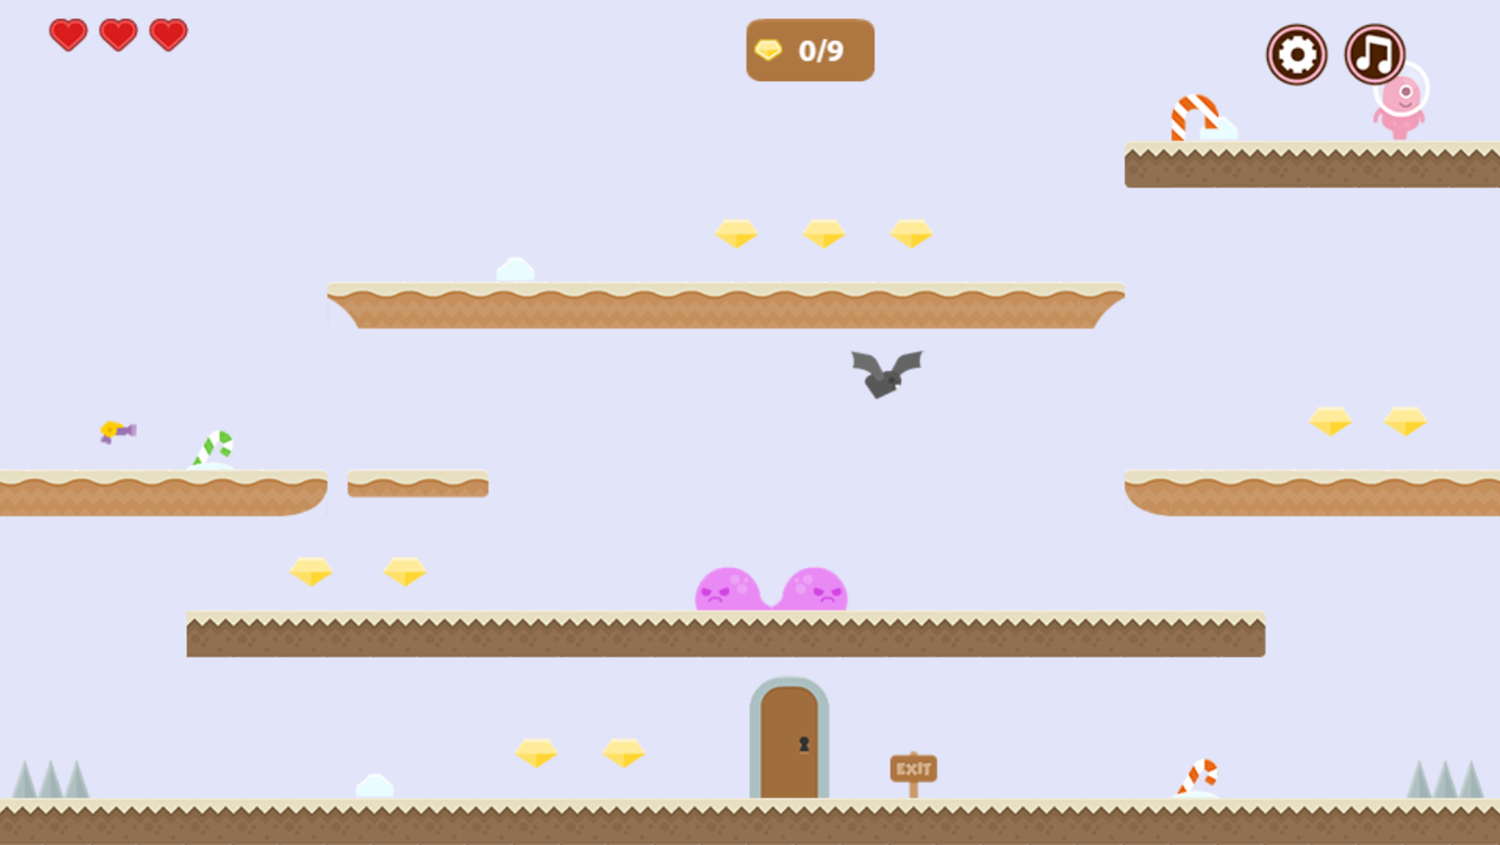 My Sweet Adventure Game Level With a Moving Platform Screenshot.